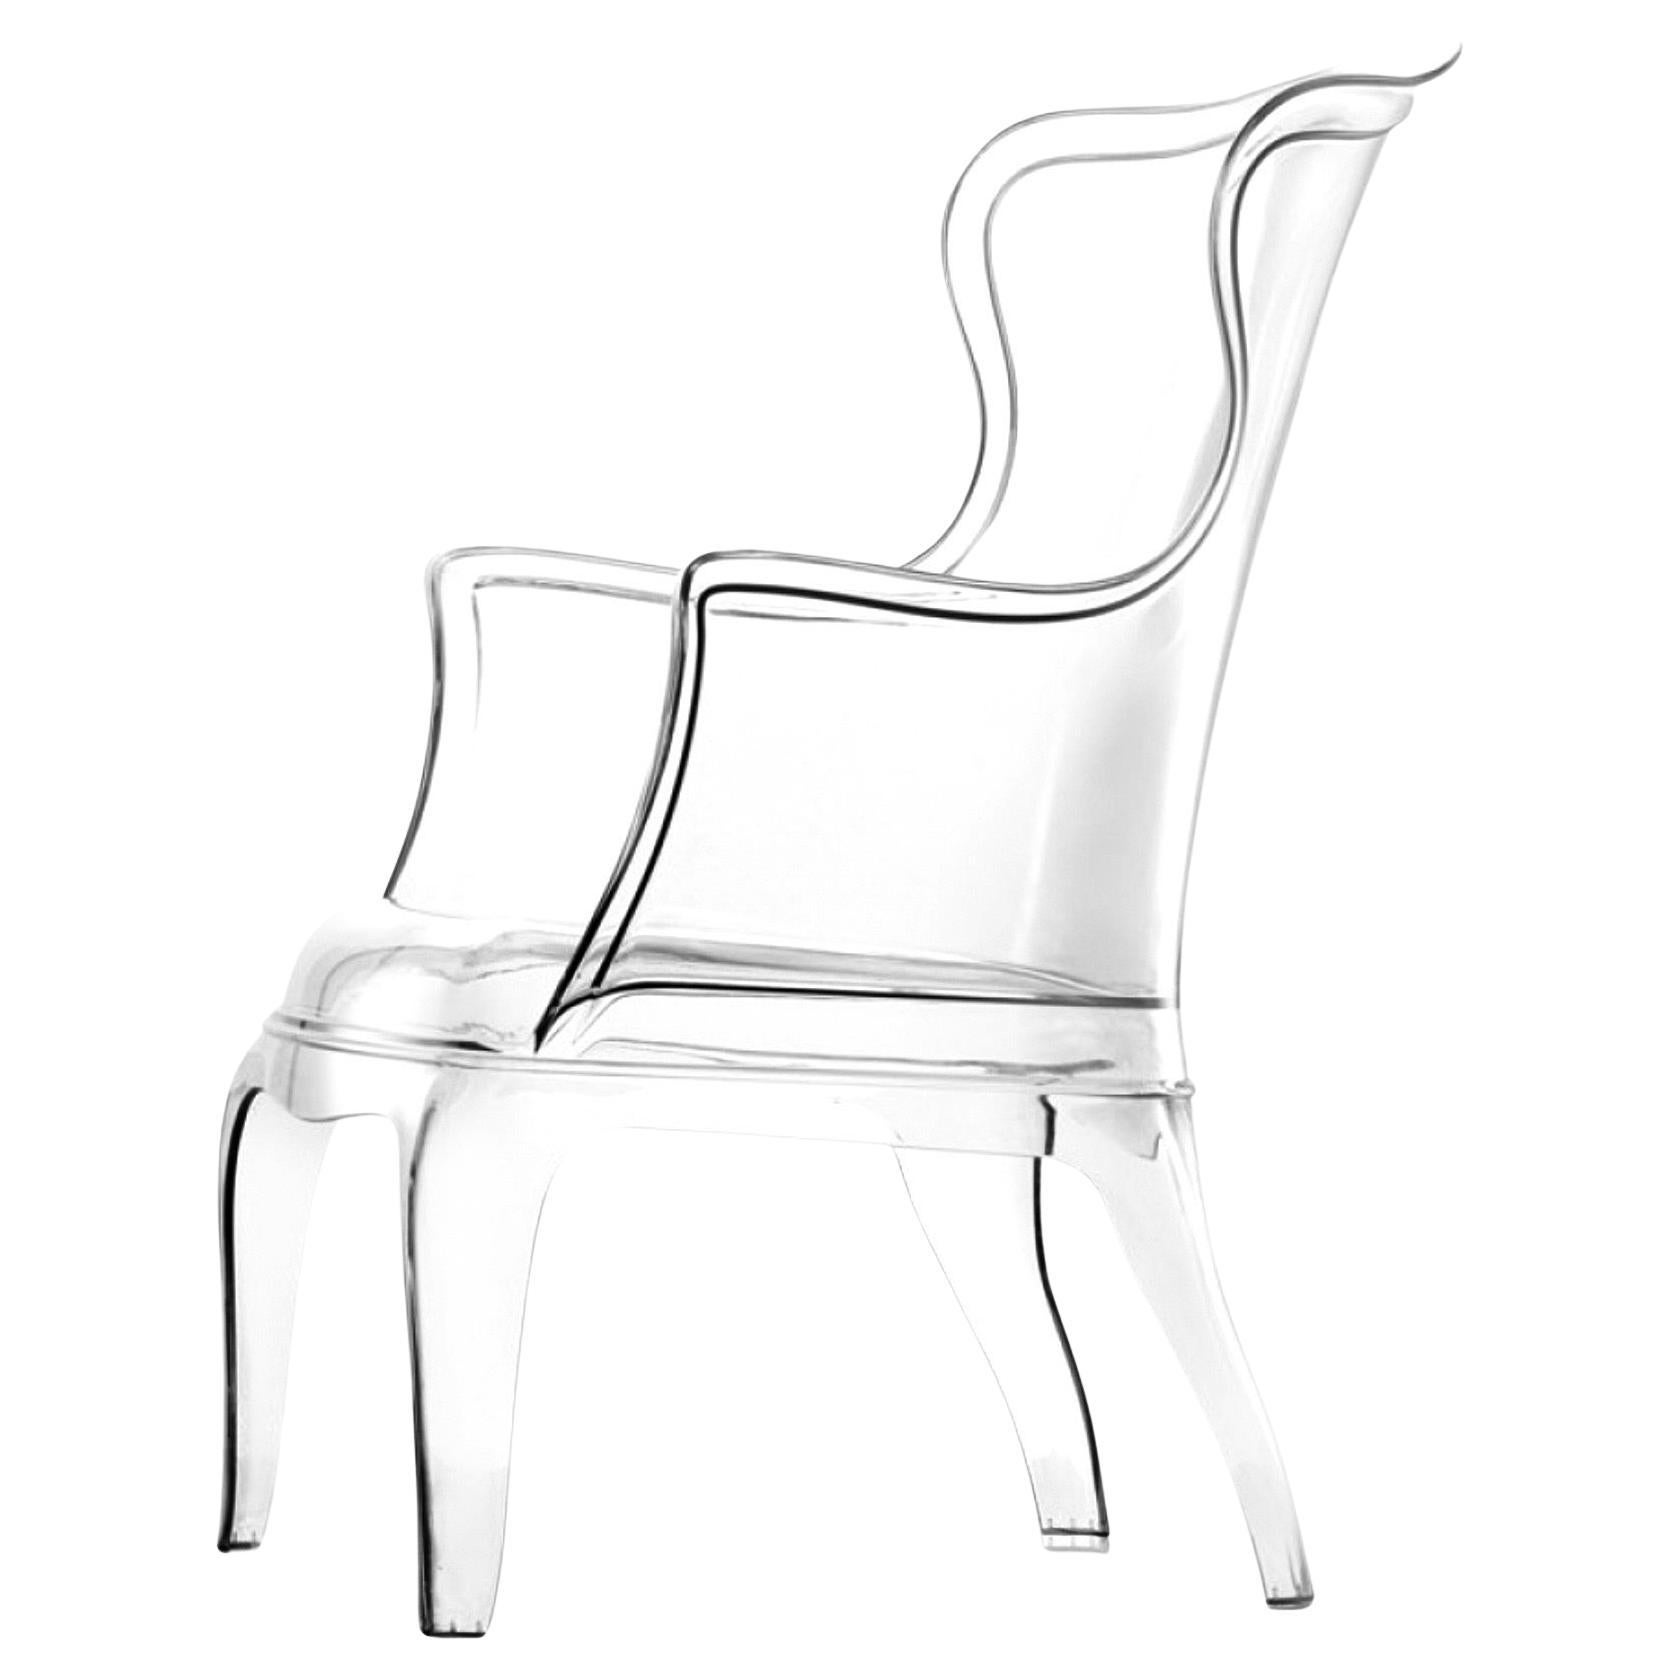 Pedrali Pasha 660 Fauteuil Indoor Outdoor Transparent Armchair Lounge, Italy.  For Sale